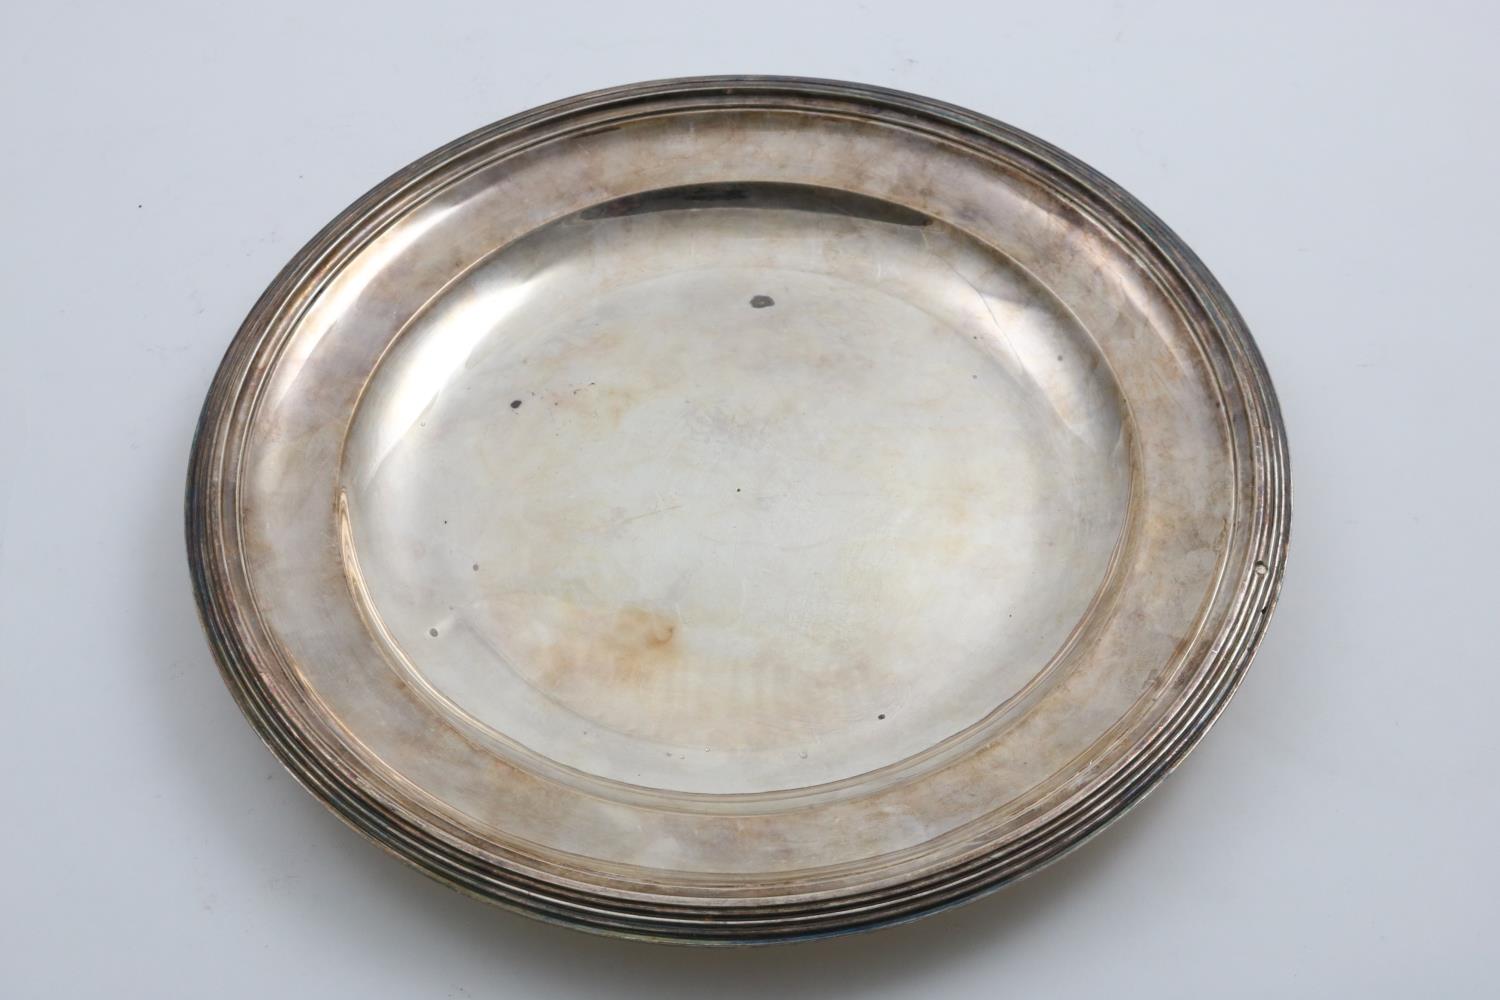 AN EARLY 19TH CENTURY FRENCH CIRCULAR DISH with a reeded rim, maker's mark of "C.CAHIER" (incuse),